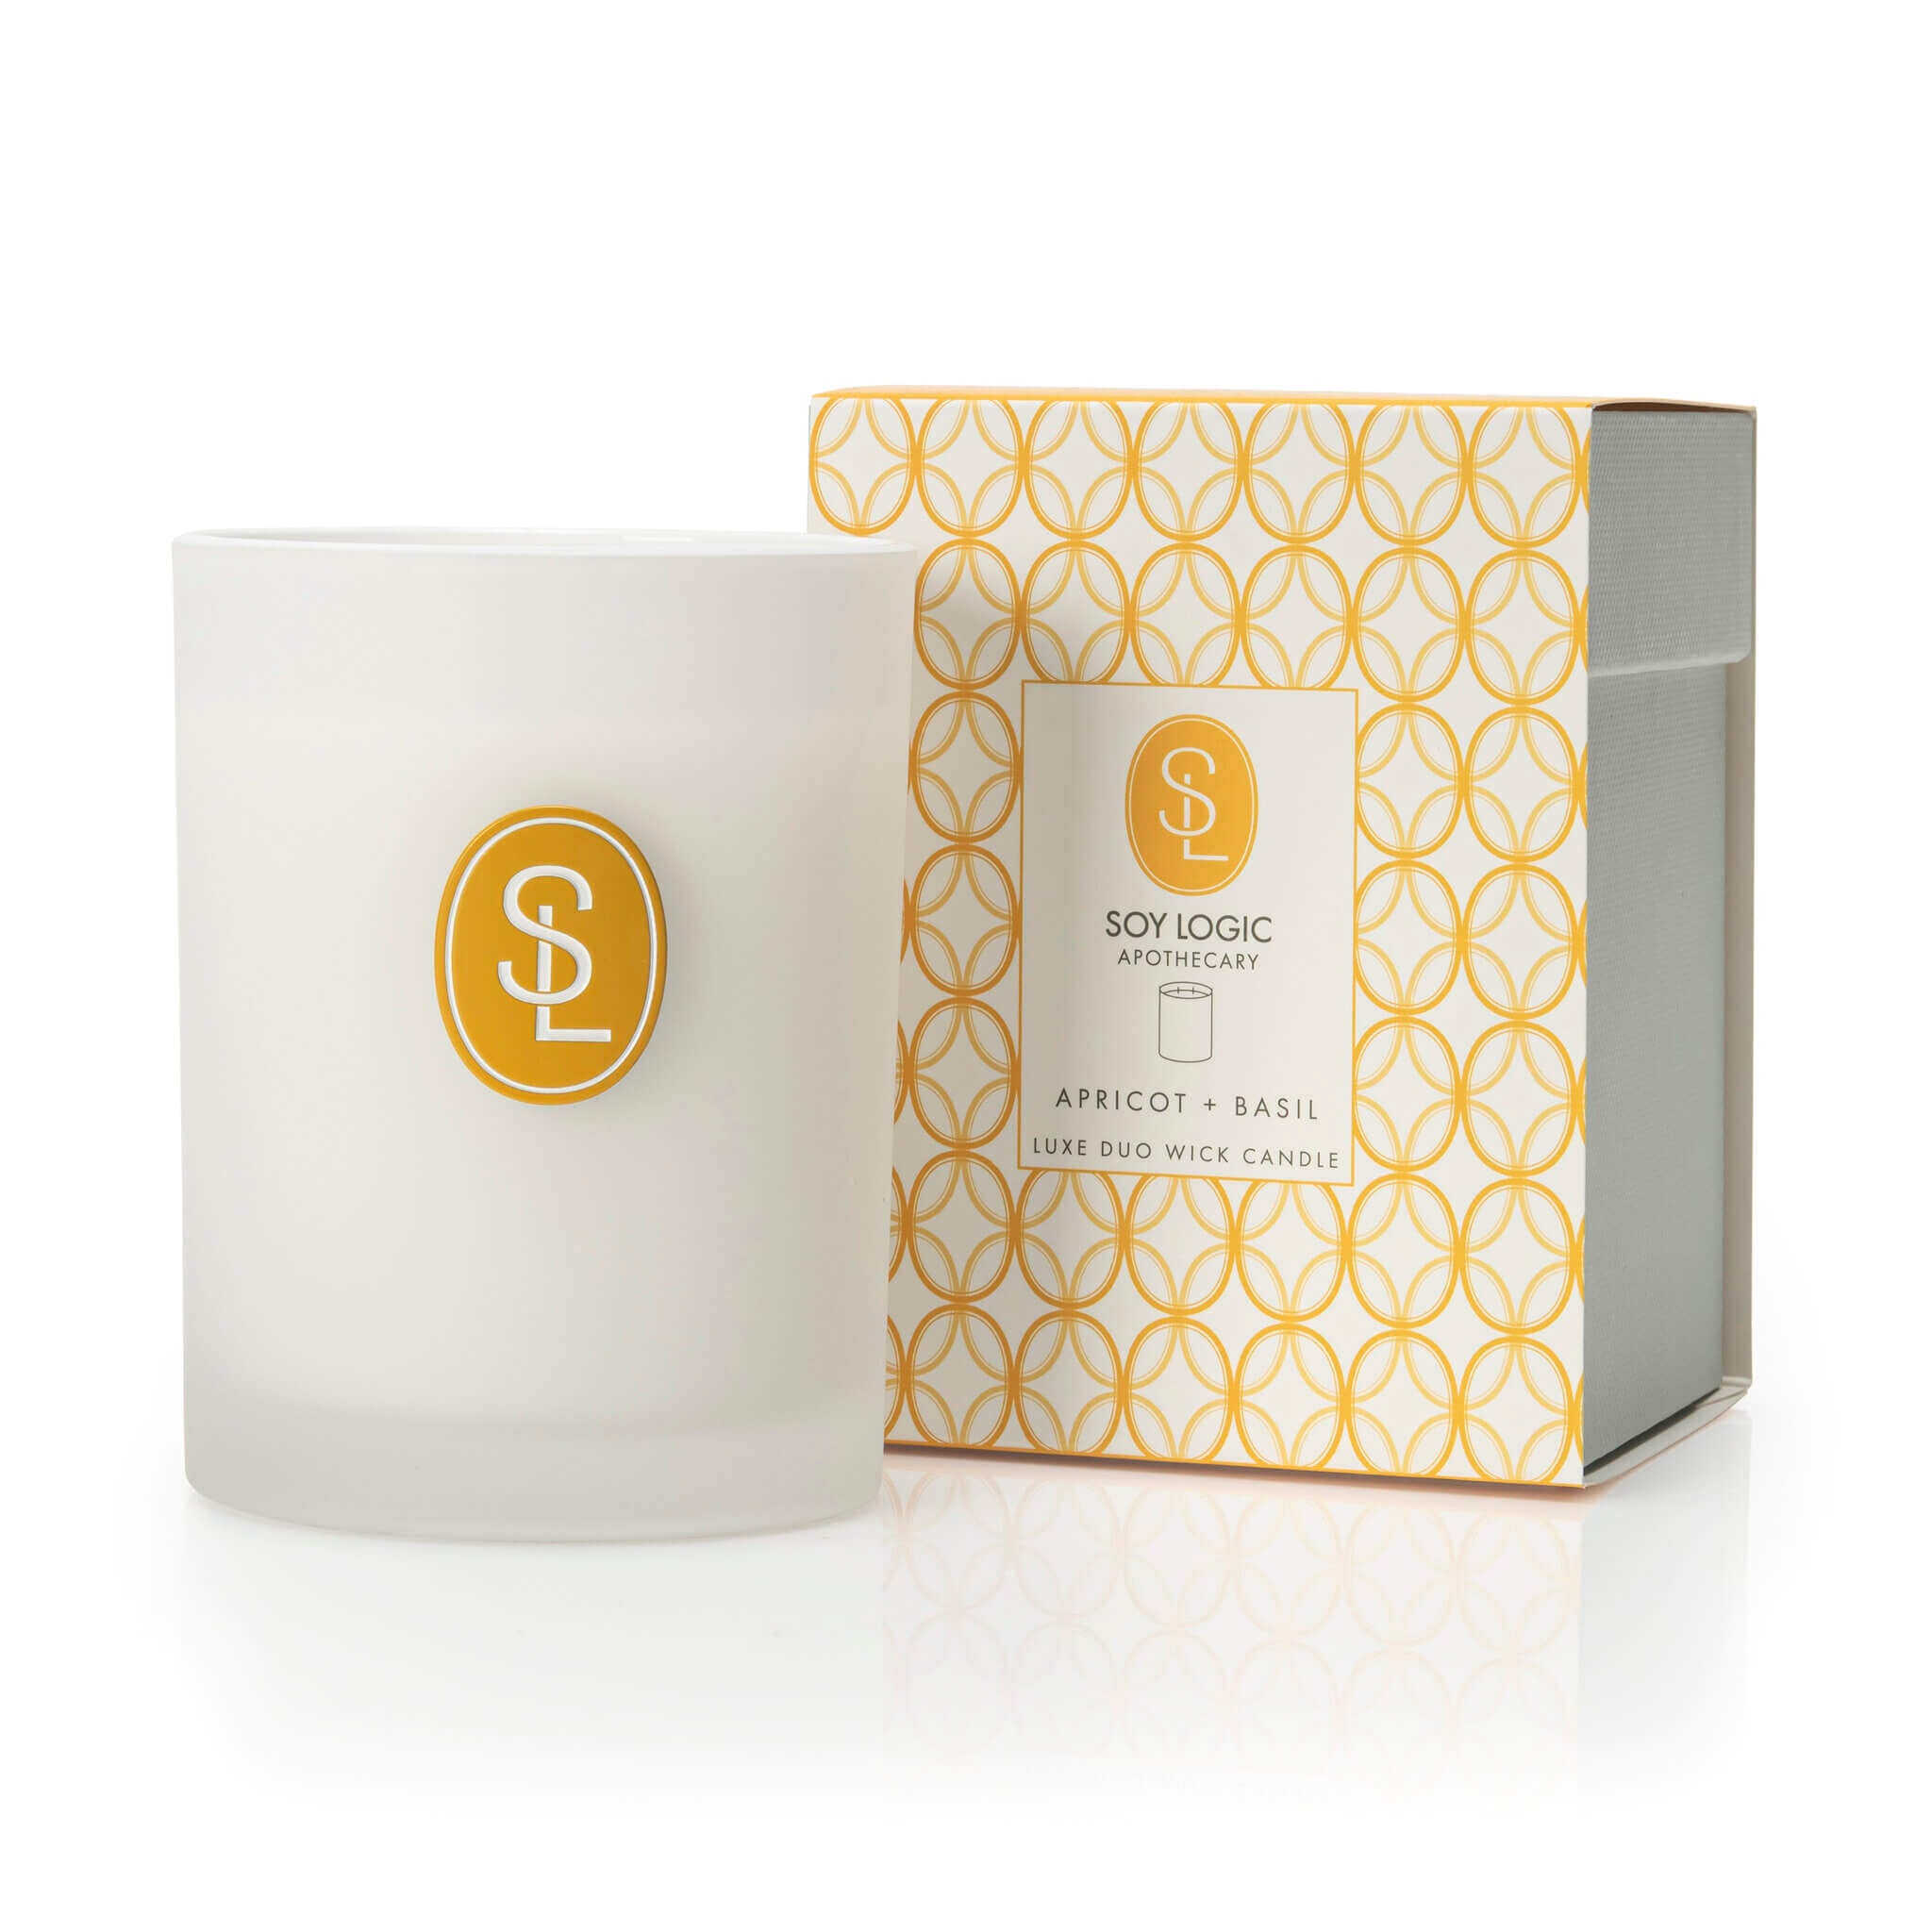 Apricot & Basil Classic Duo Wick Candle